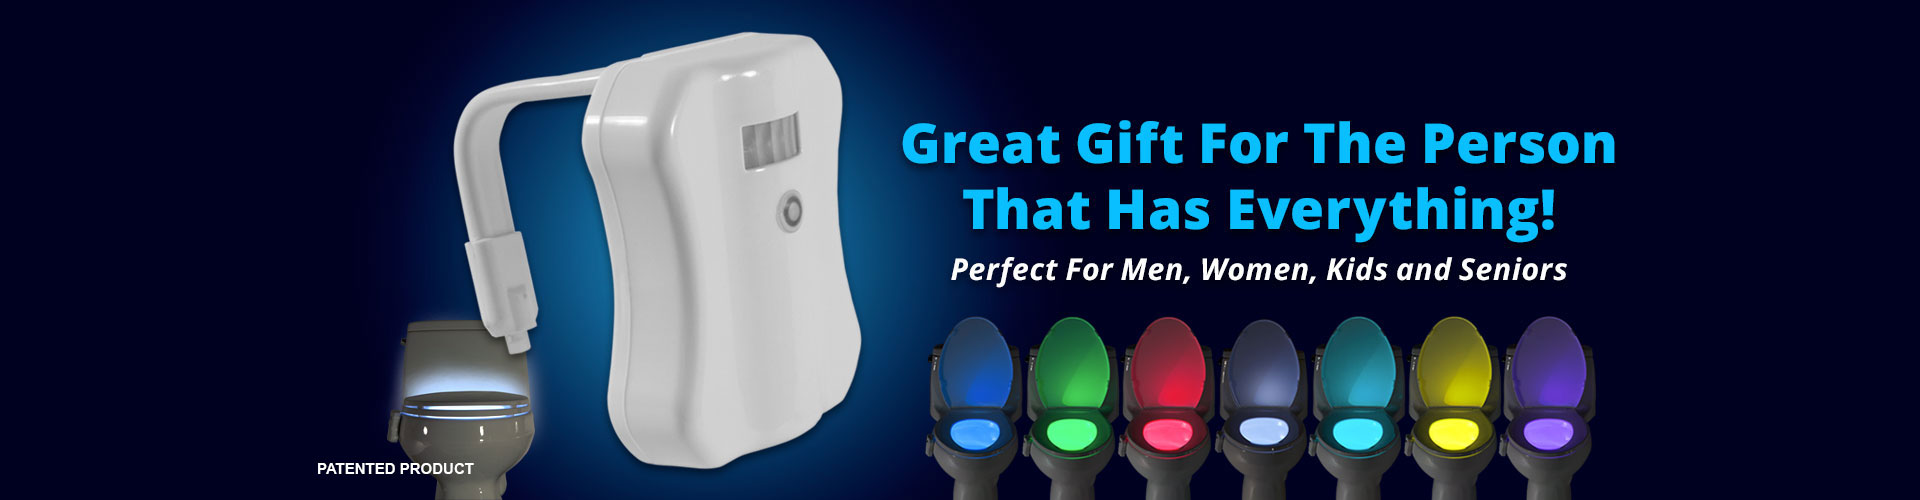 Glow Bowl Review Led Light Toilet Air Freshener In One